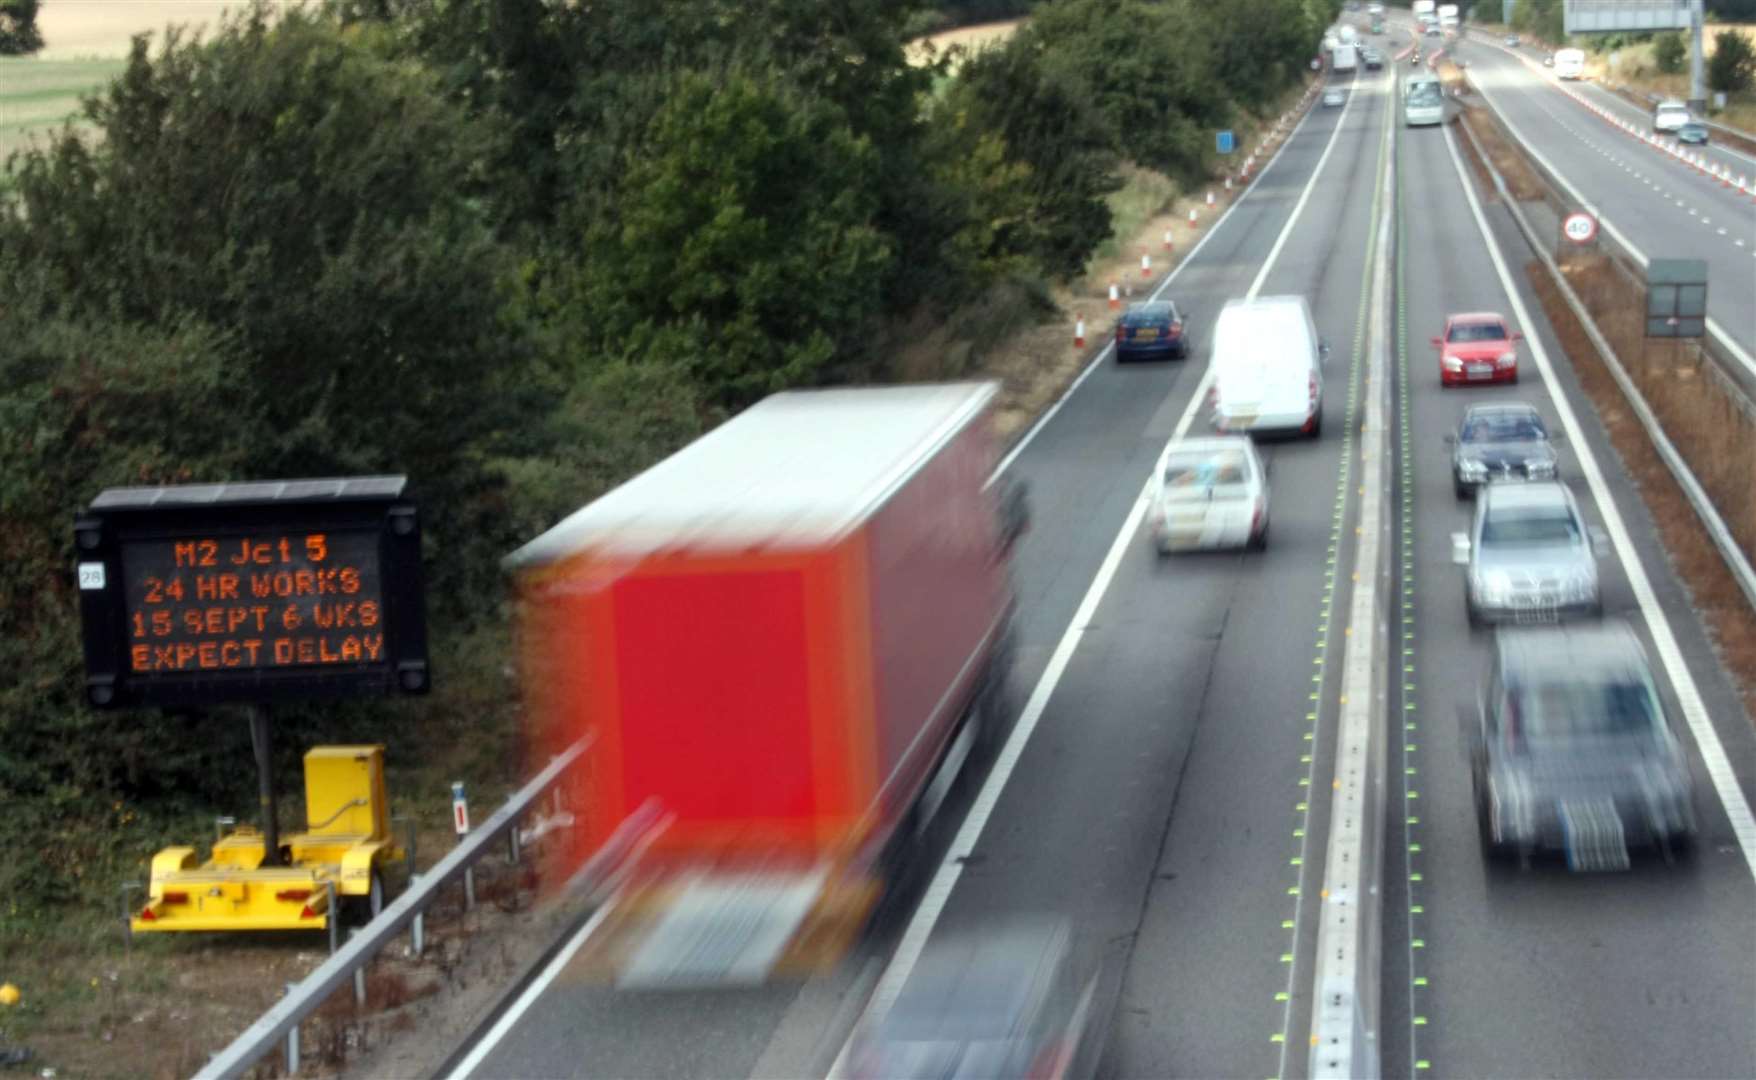 There are roadworks on the M2 and the M20